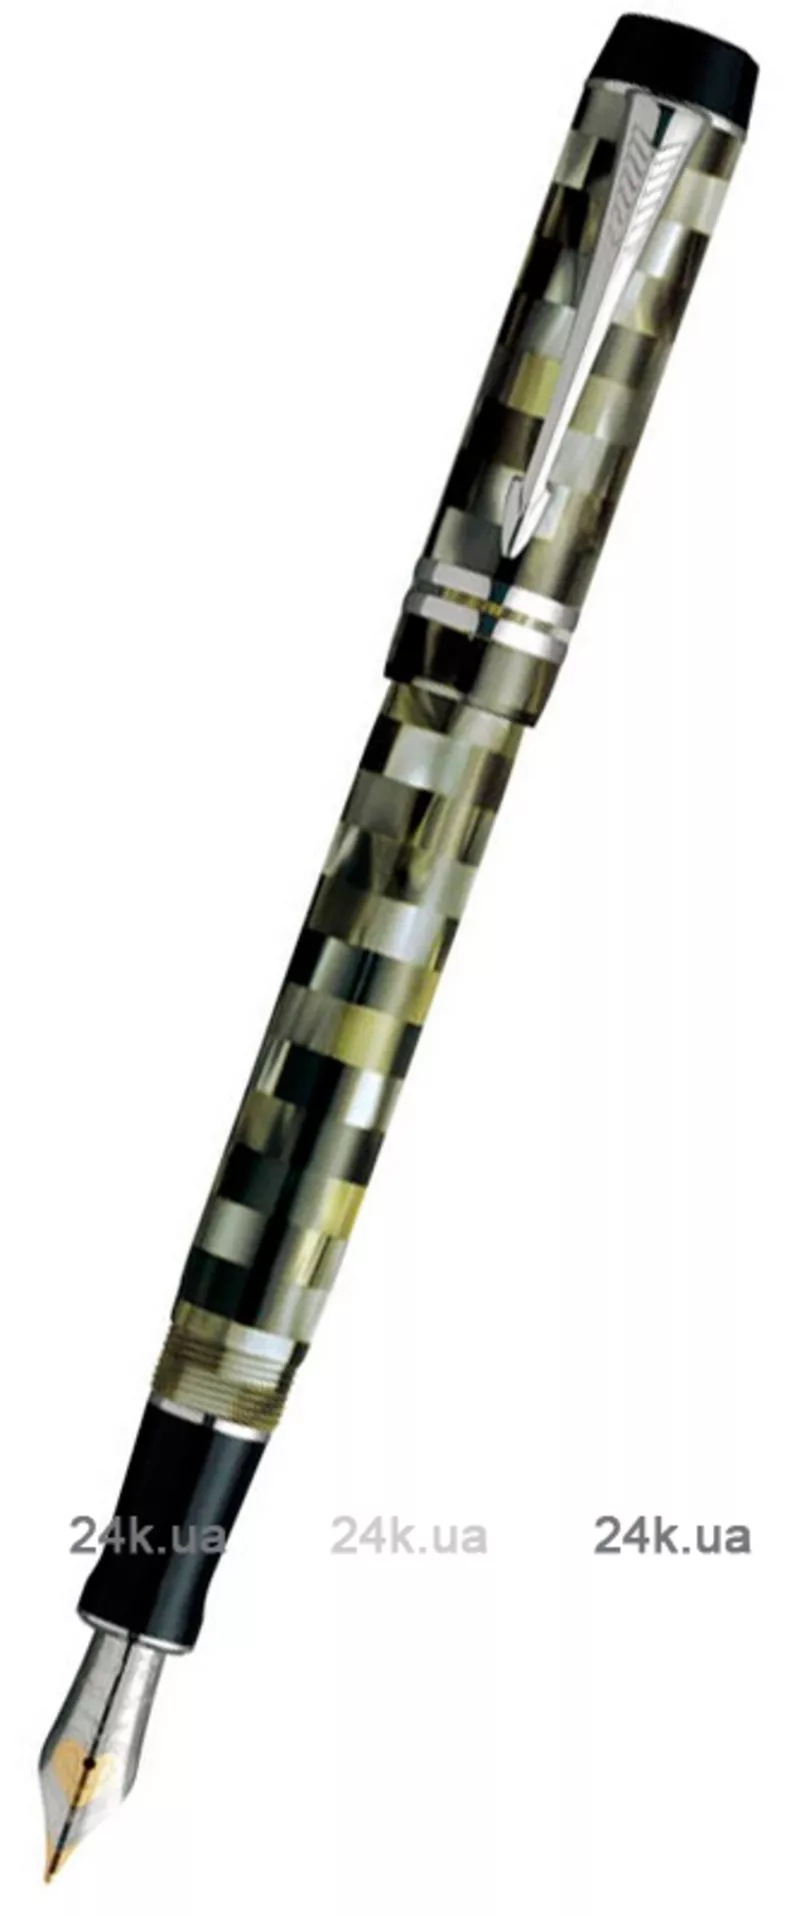 Ручка Parker Duofold Check Green PT FP F 91 212G